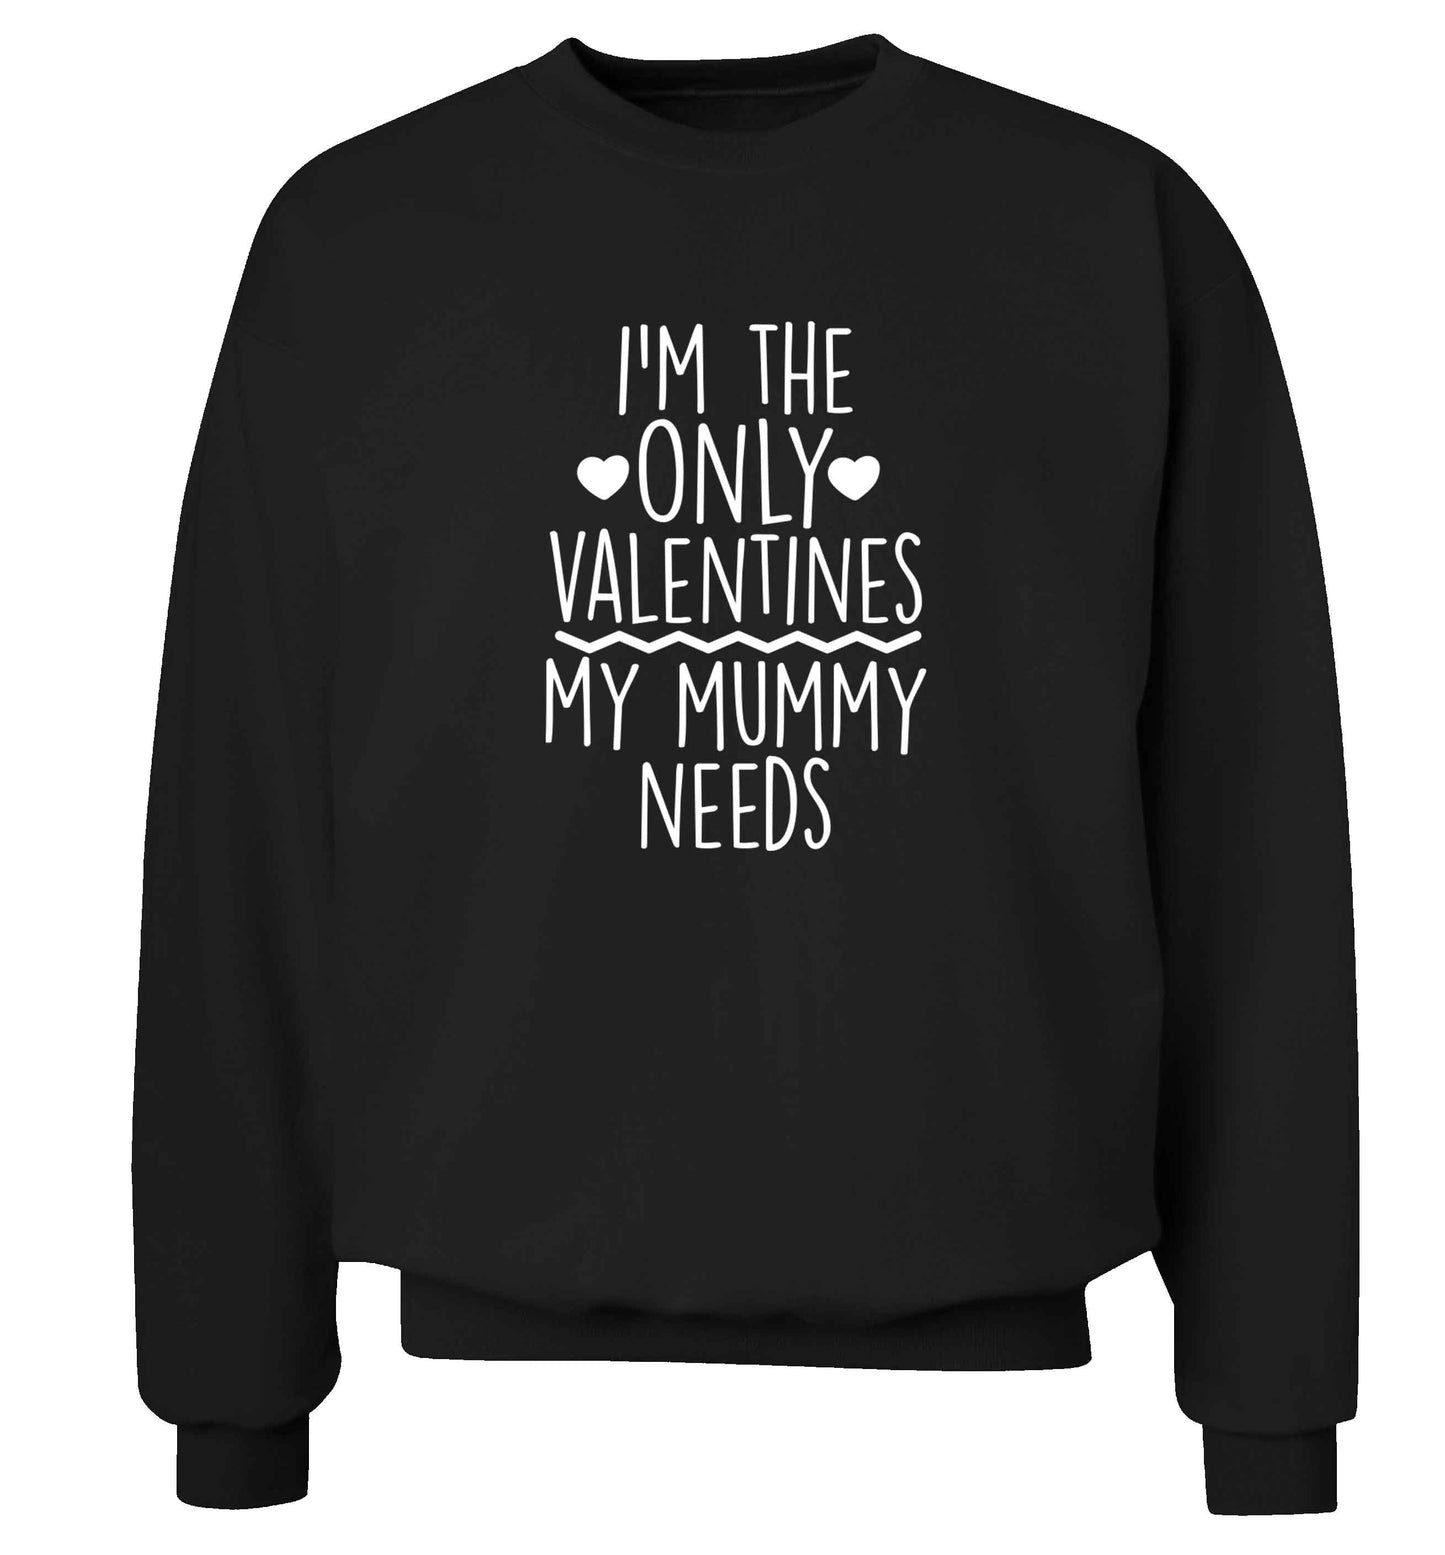 I'm the only valentines my mummy needs adult's unisex black sweater 2XL